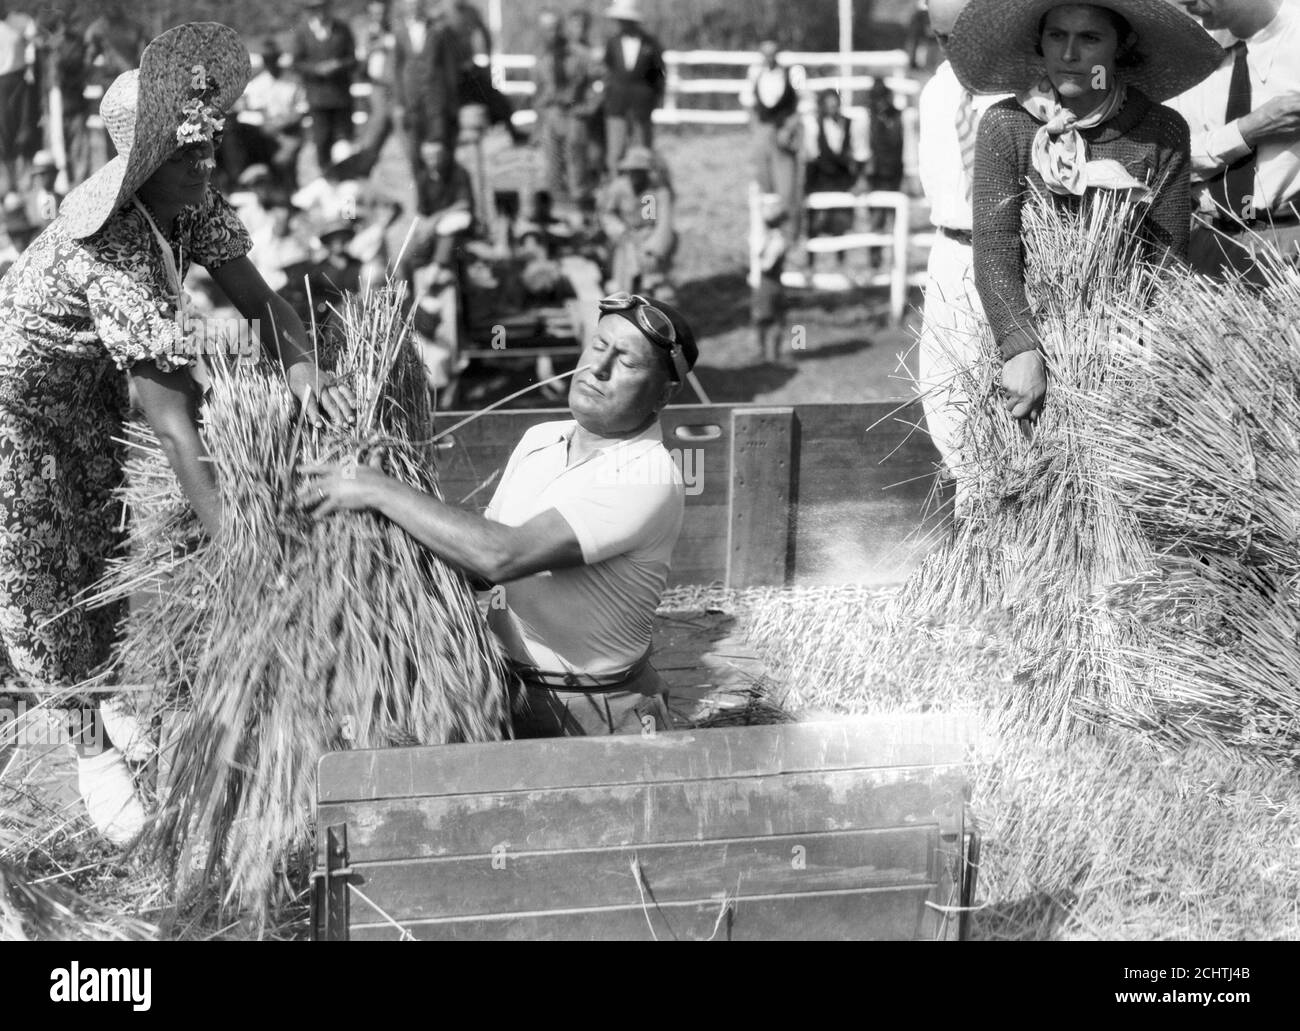 History of Fascism: wheat campaign. Benito Mussolini promoting wheat campaign by doing himself the job, 1934. Stock Photo